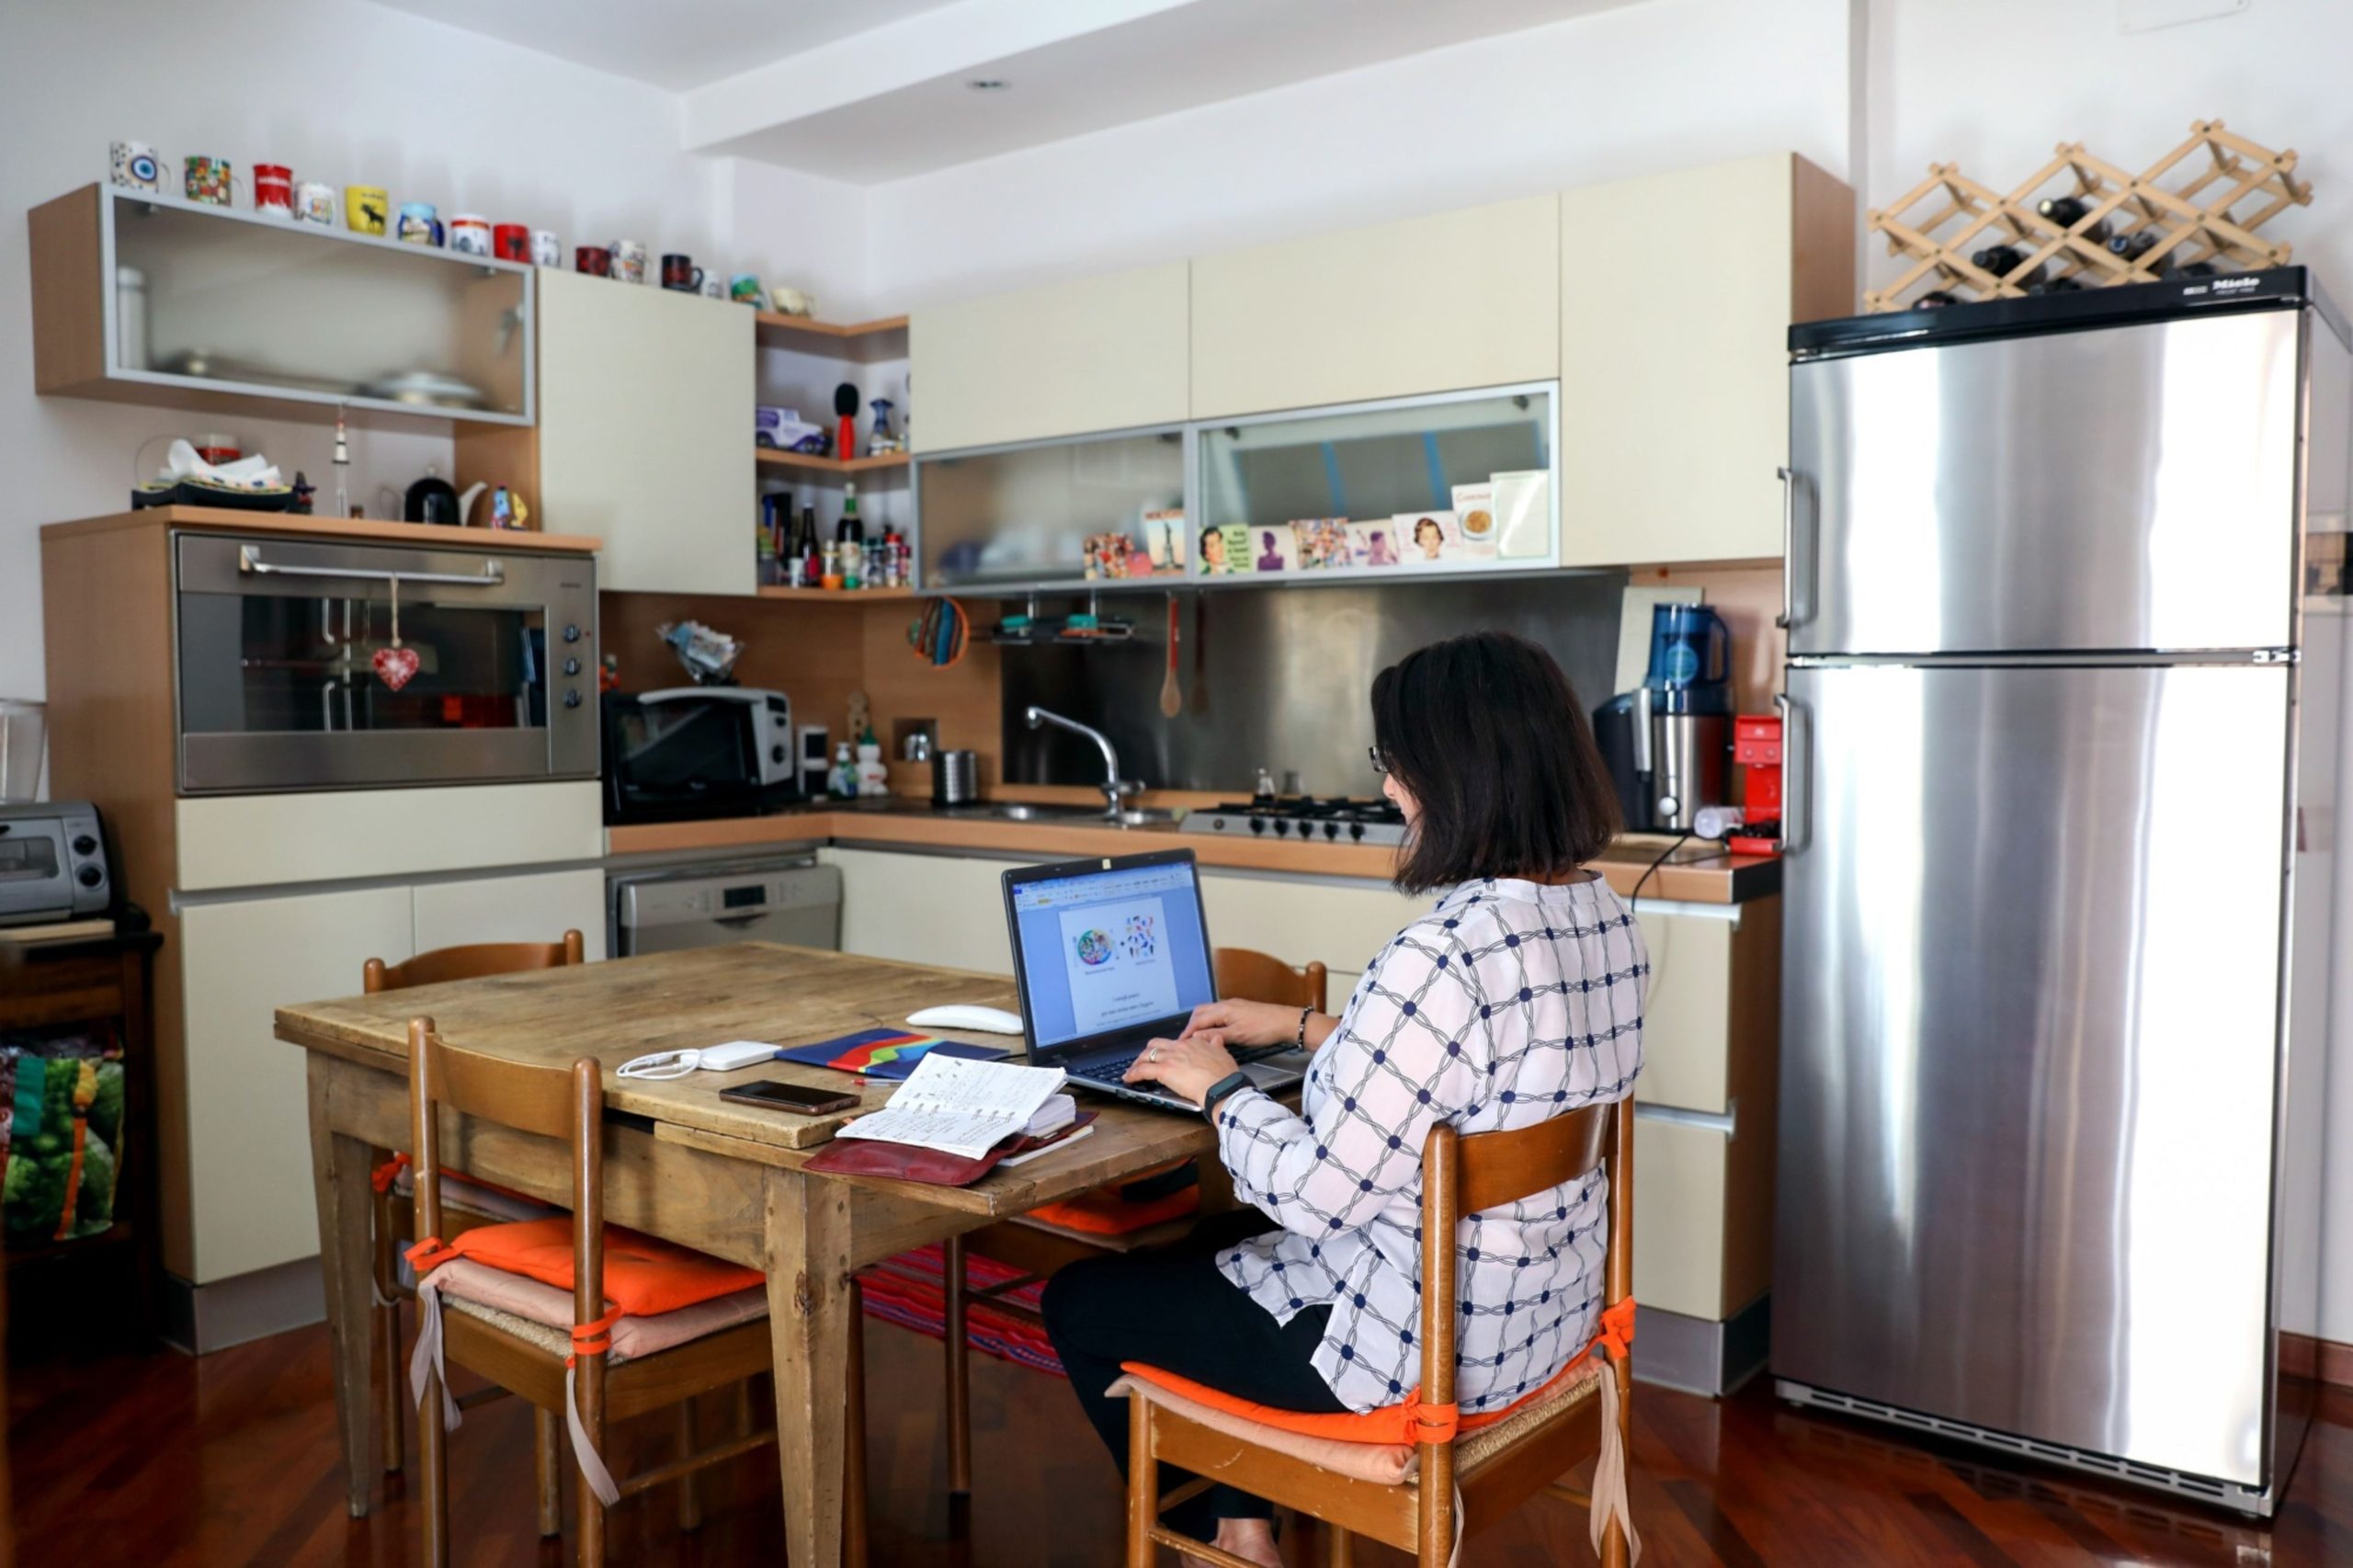 A worker uses a laptop computer whilst working from home at a table in her kitchen in Rome, Italy, on Oct. 8, 2020